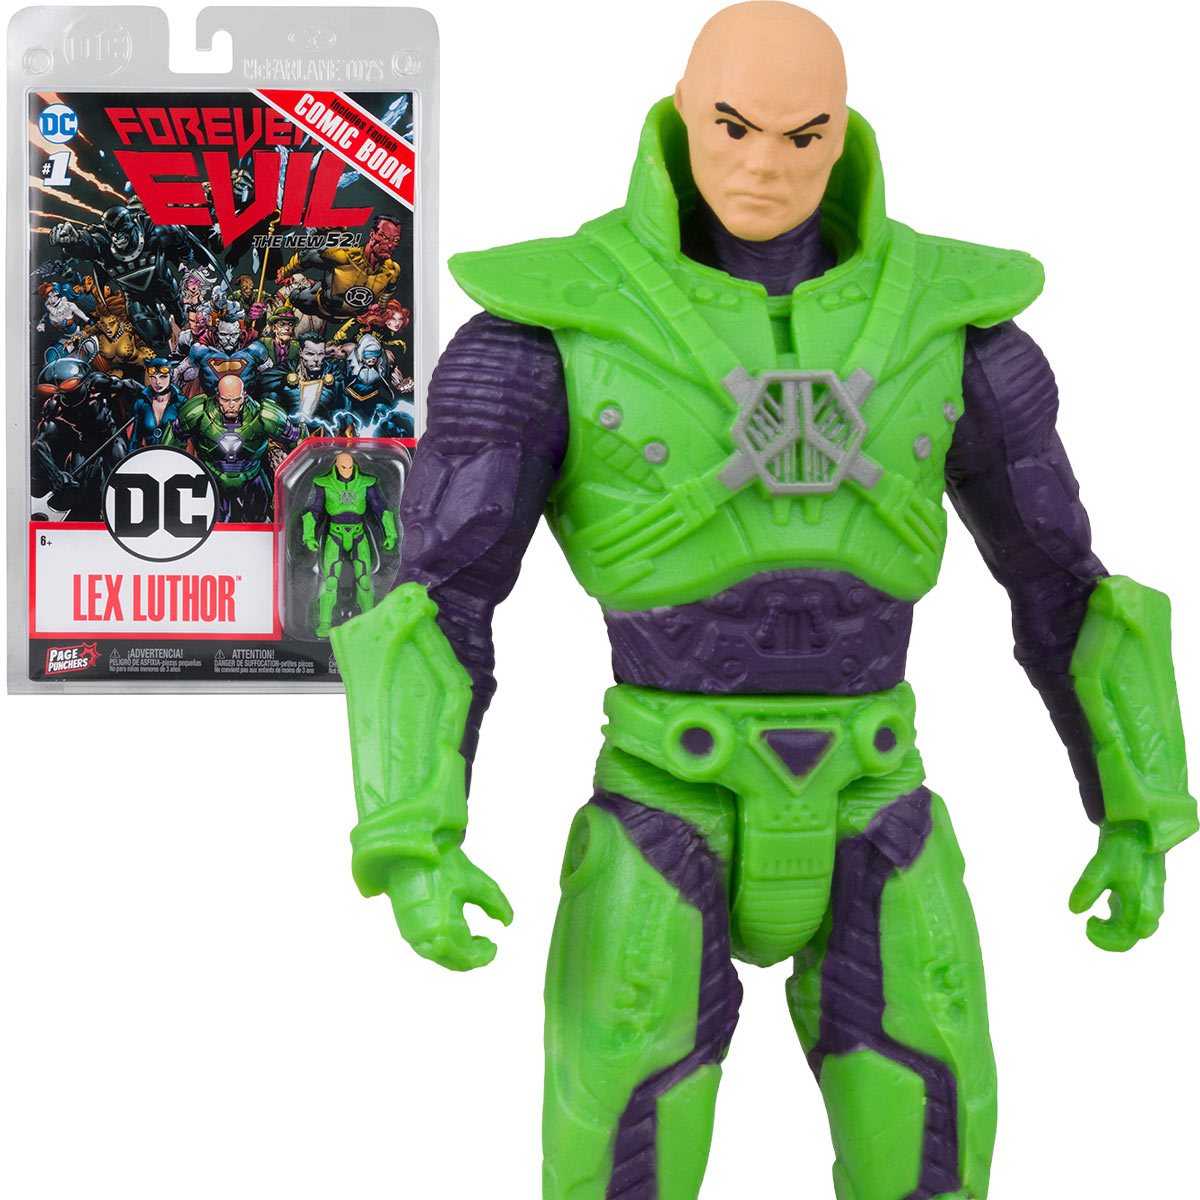 Lex Luthor Forever Evil Page Punchers 3-Inch Scale Action Figure with Comic Book